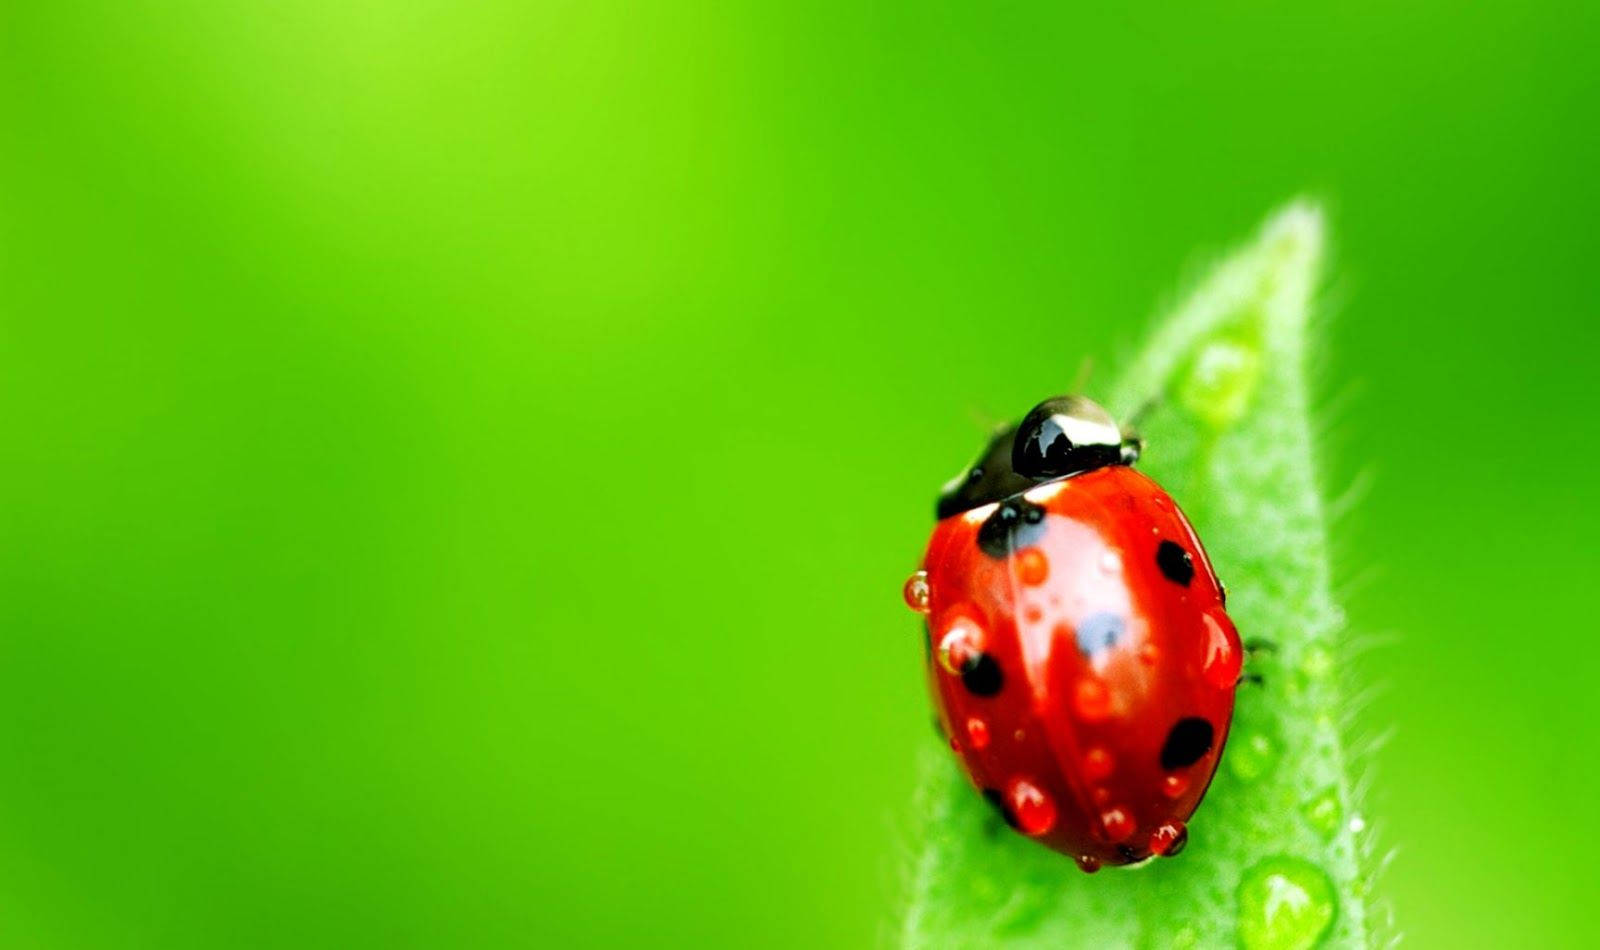 Insect Ladybug With Water Droplets Background